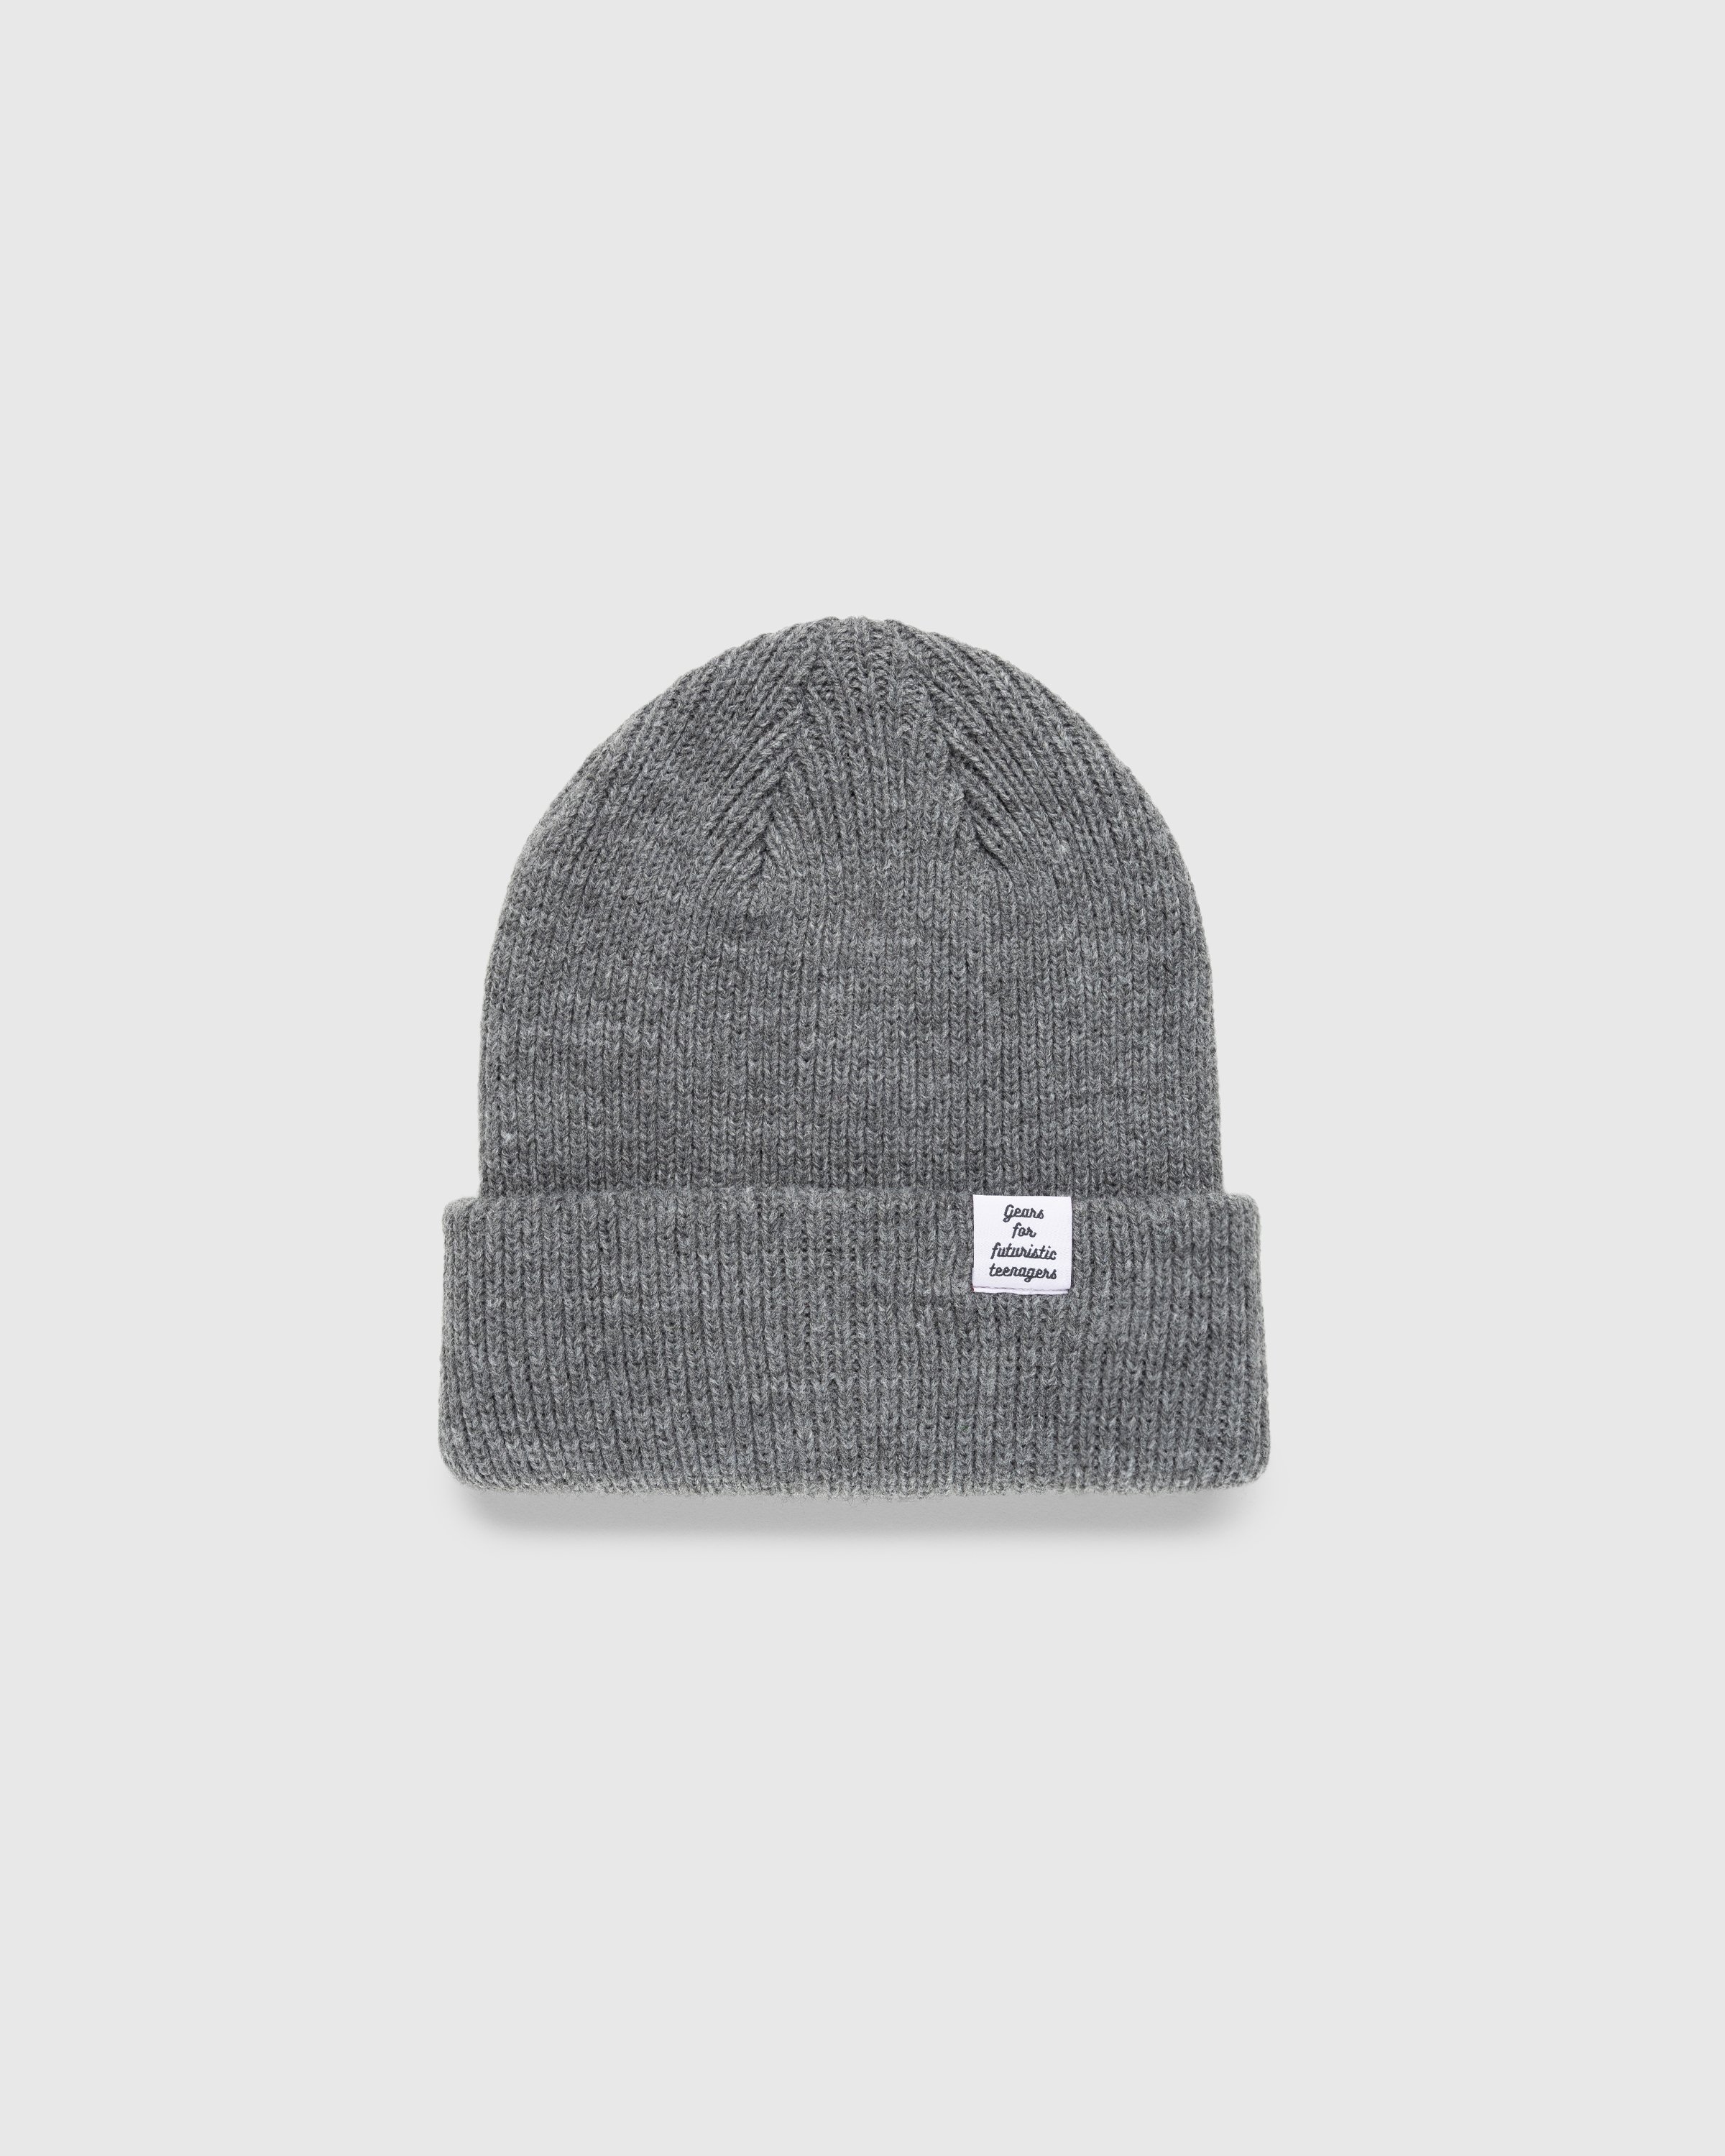 Human Made - Classic Beanie Gray - Accessories - Grey - Image 1